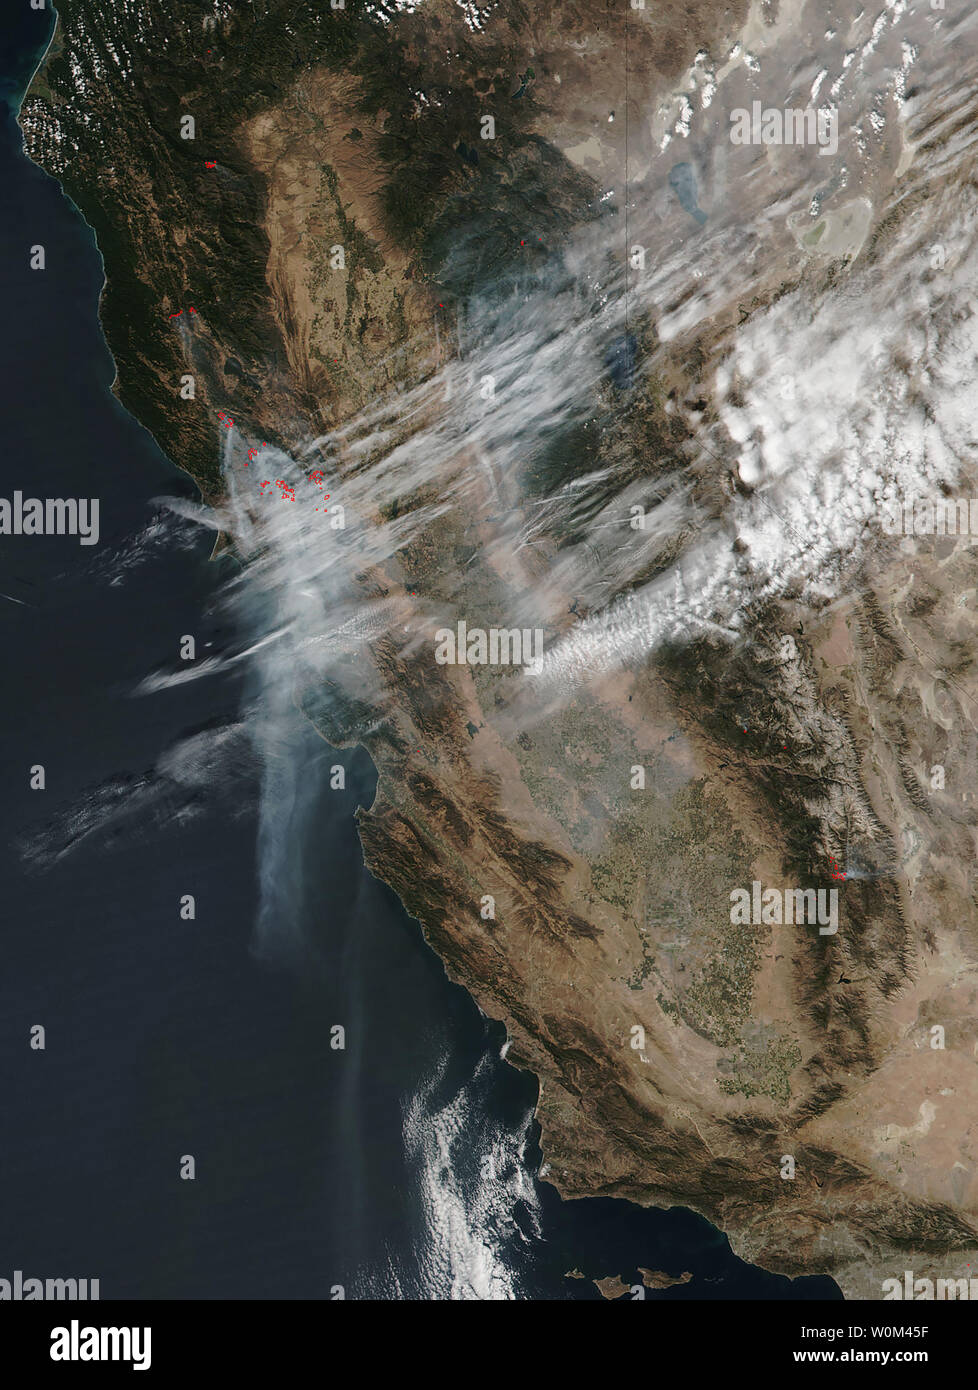 This satellite image was The Suomi NPP satellite's Visible Infrared Imaging Radiometer Suite (VIIRS) instrument captured a look at multiple fires and smoke in California on October 11, 2017. Yesterday the Tubbs fire had destroyed 28,000 acres, and today the acreage has grown to 34,270. The Nuns fire which yesterday had consumed 5,000 acres has grown to 14,698 acres. Atlas was at 26,000 acres and today is at 43,762. The Partrick fire had affected 6,000 acres and today has grown to 10,817, and the Redwood Complex which devastated 29,500 acres has now grown to 32,100 acres. The California fires s Stock Photo